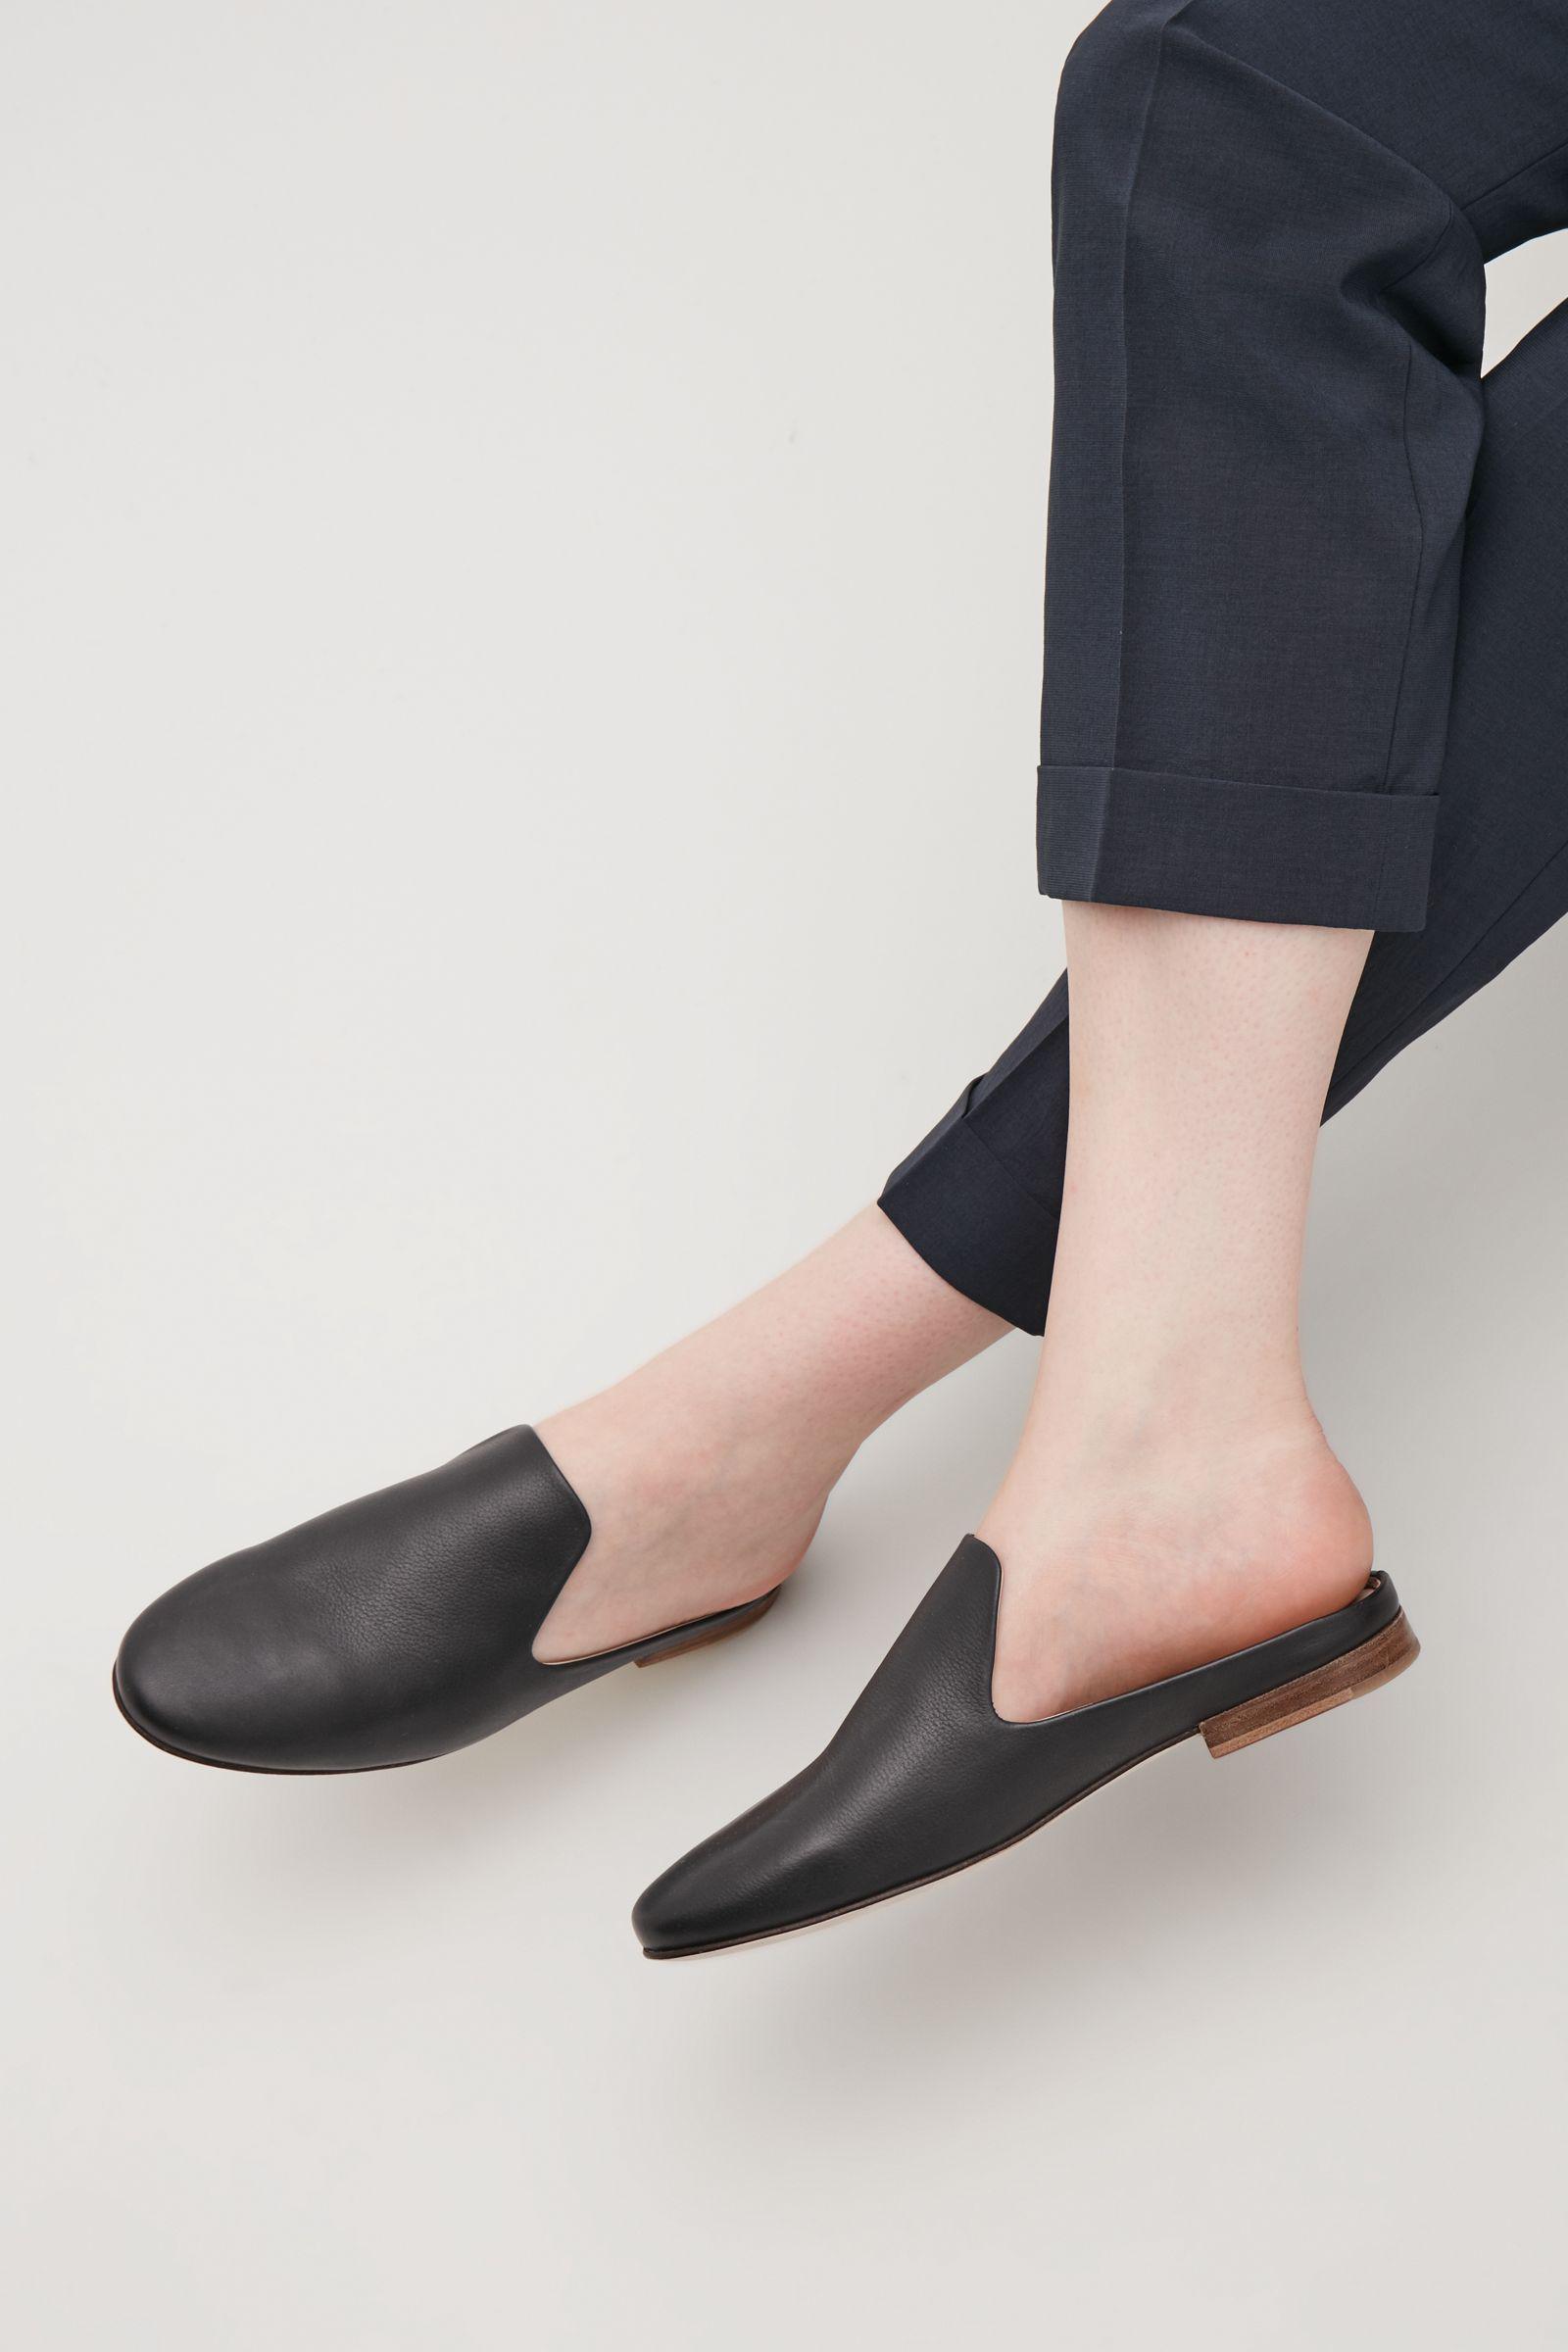 cos slip on leather shoes